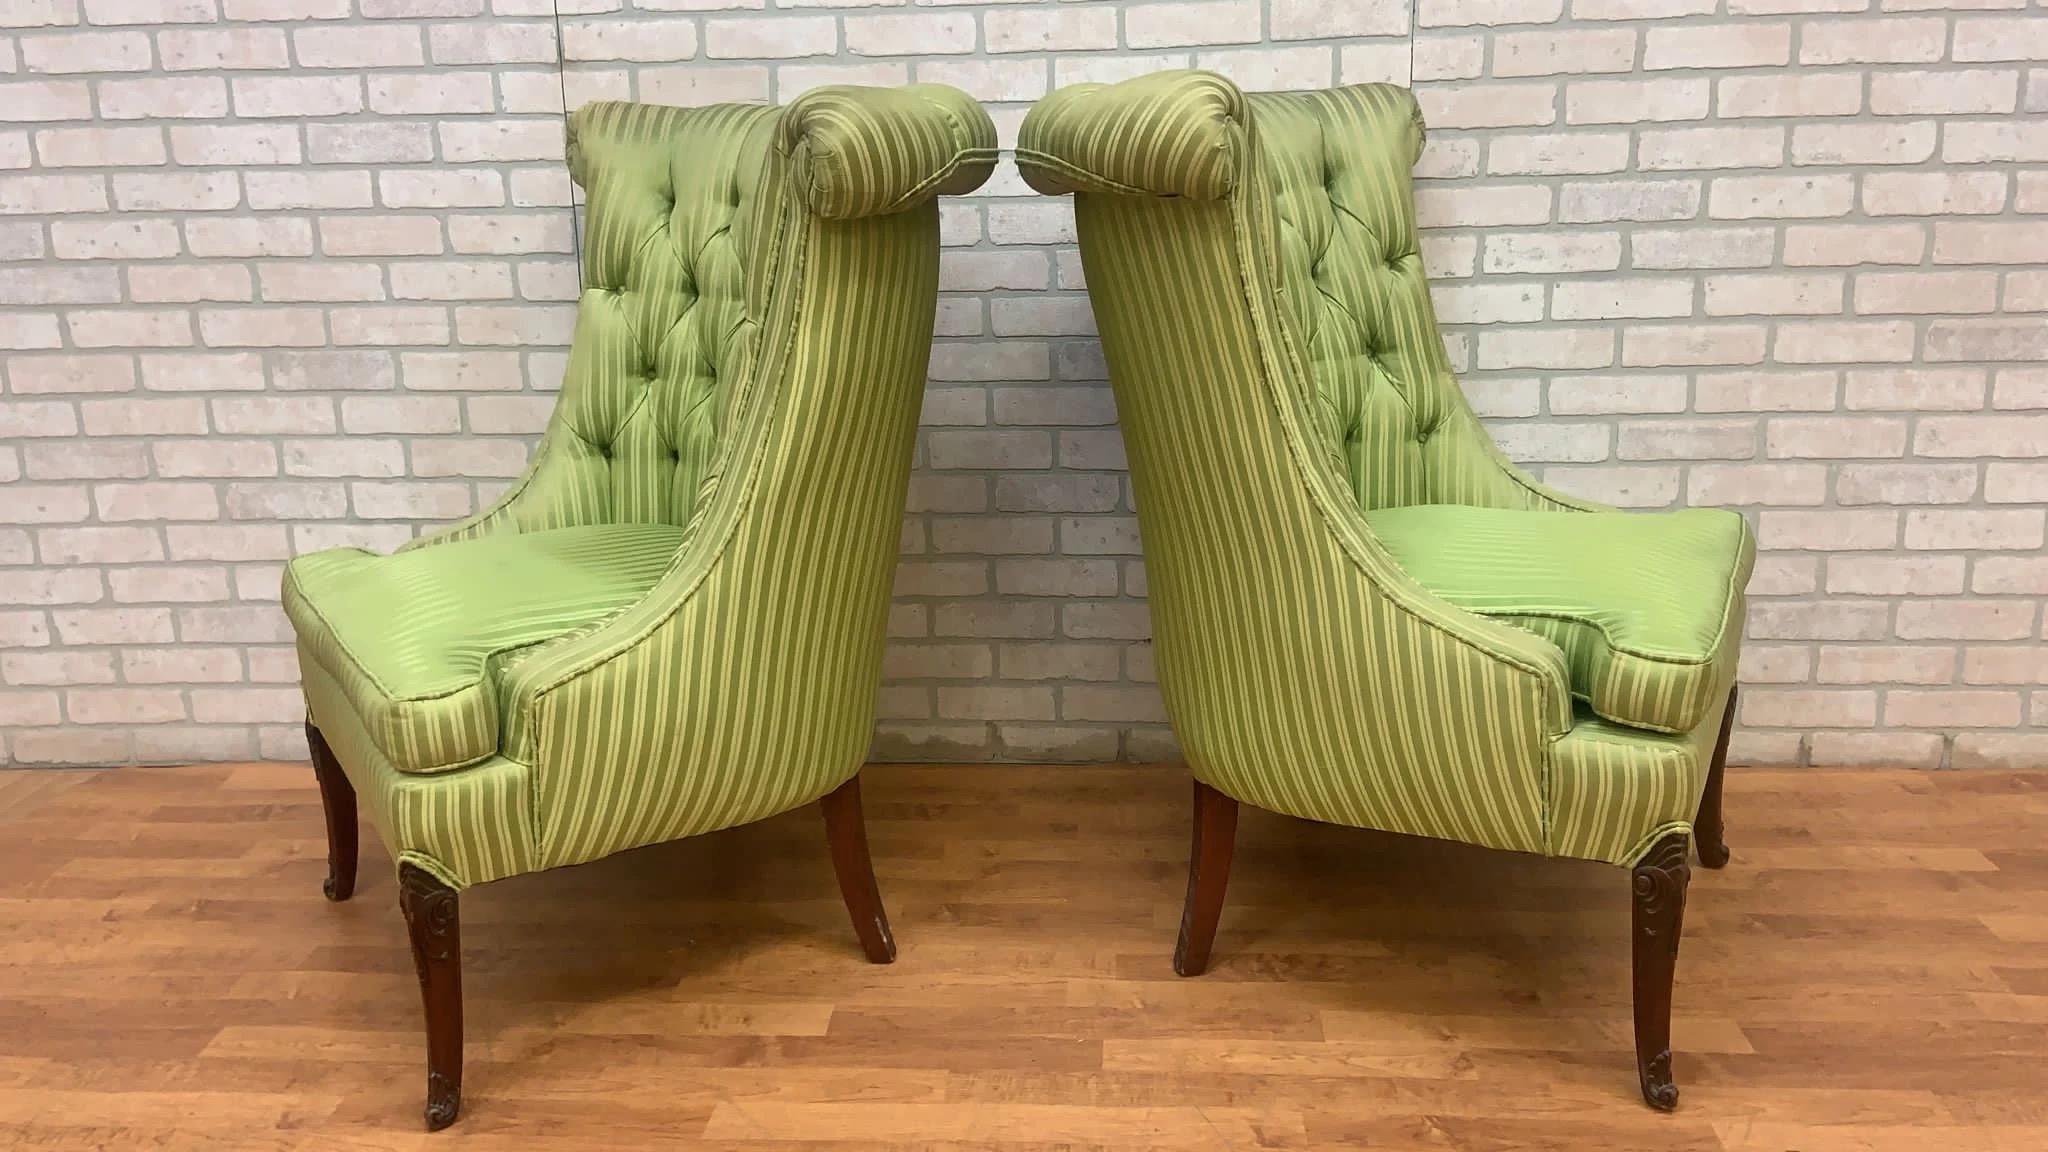 Upholstery Vintage Queen Anne Style Rolled Back Tufted Wingback Chairs - Pair For Sale